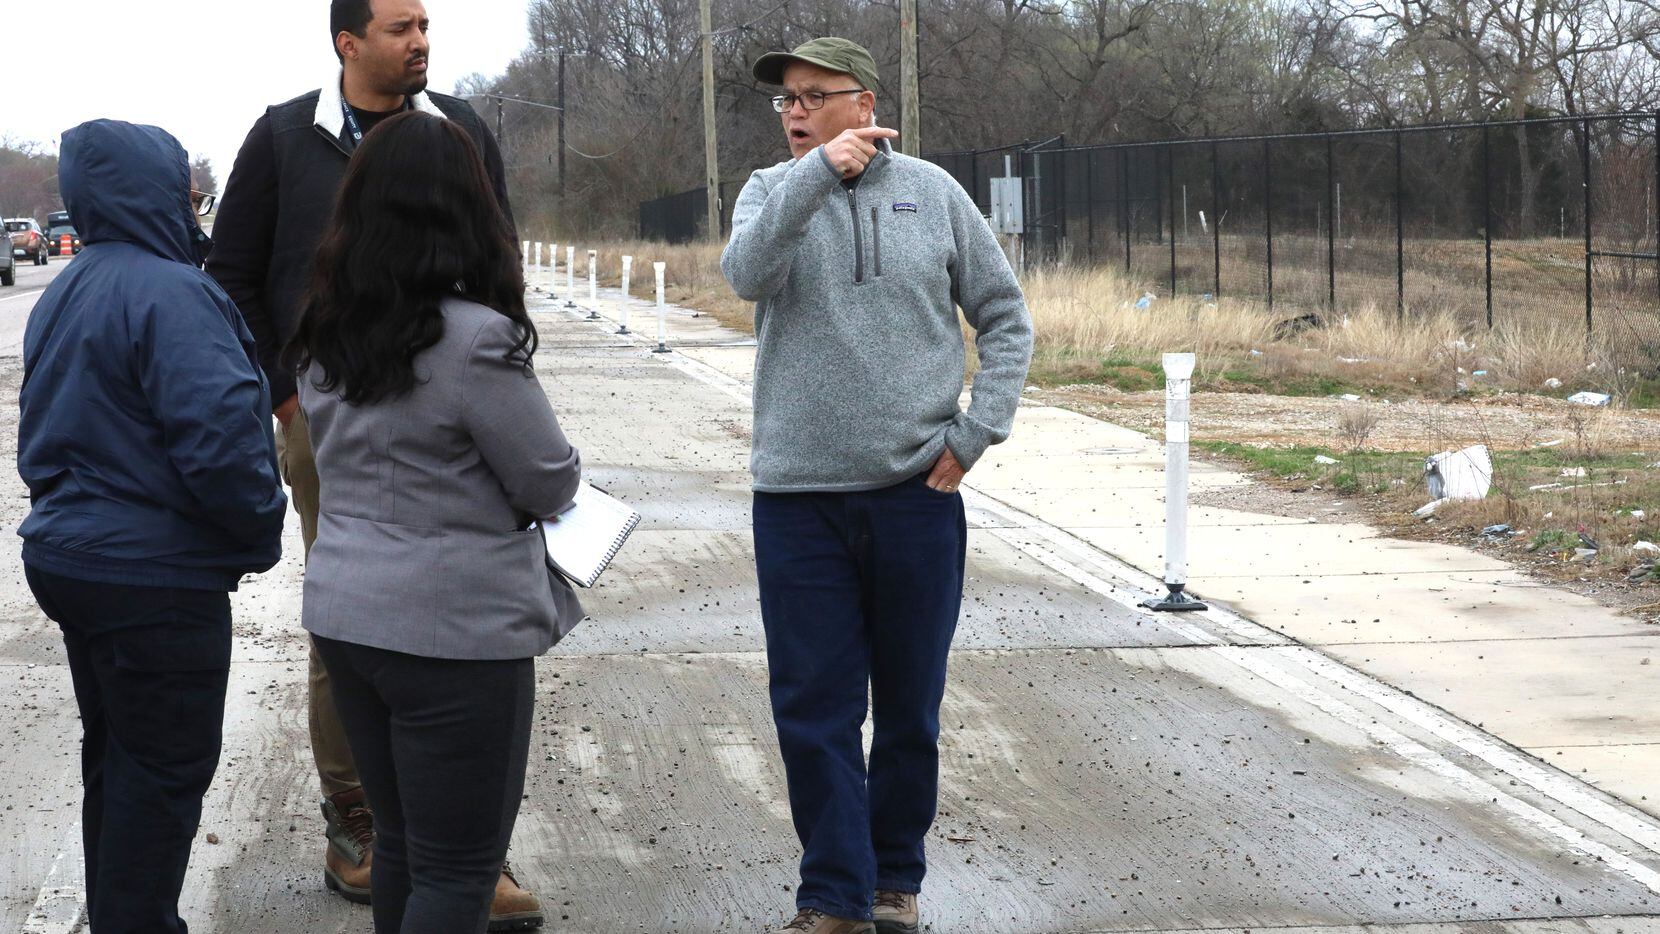 Dallas resident Erich Schoenkopf (right) speaks with members of Dallas' public works and...